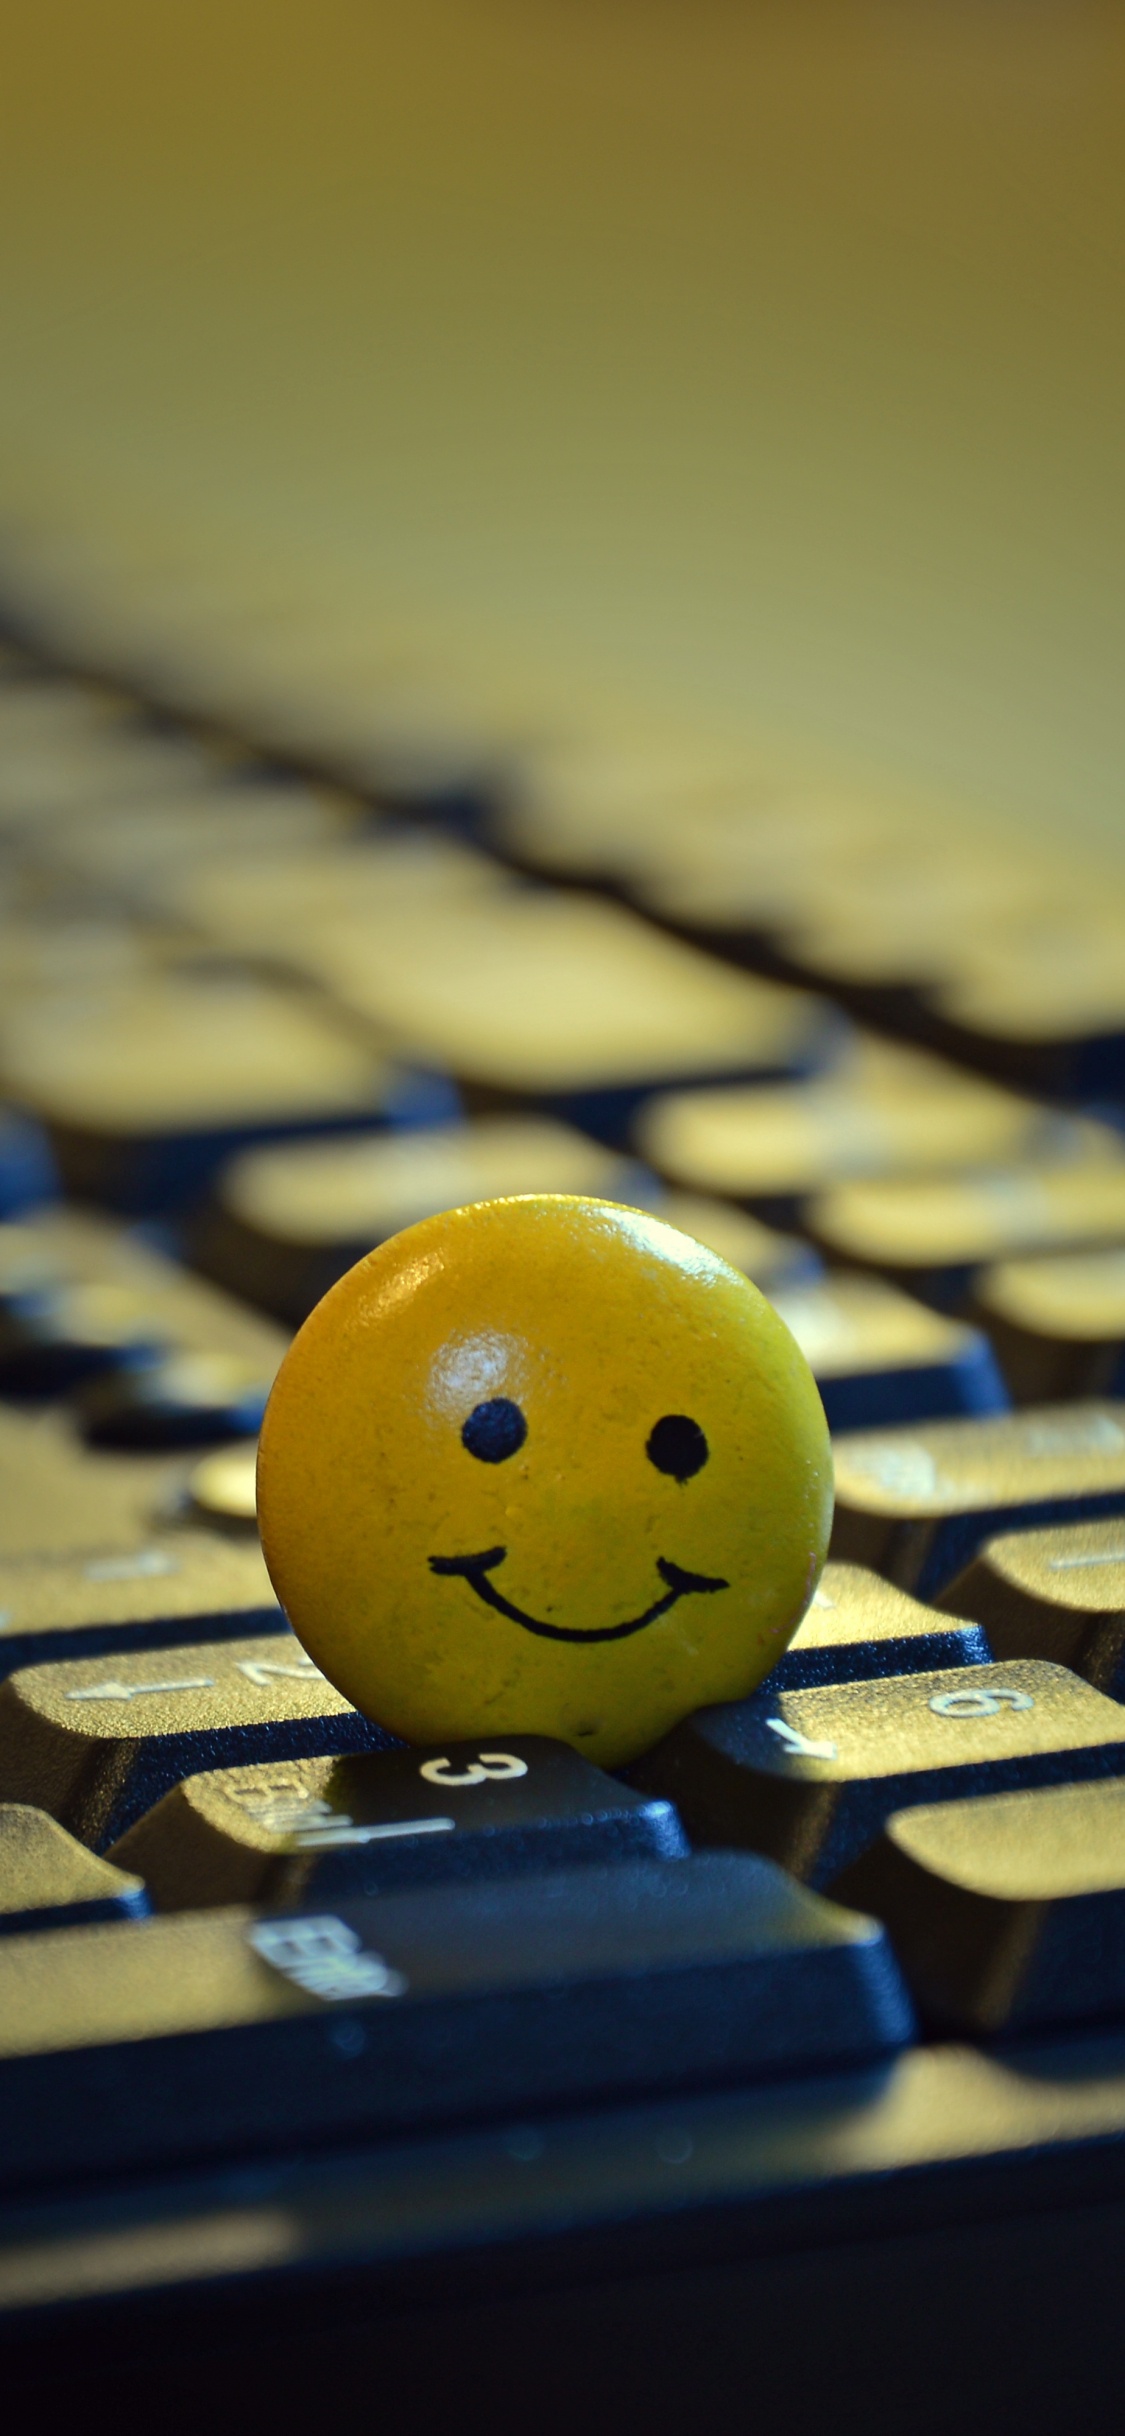 Yellow Smiley Ball on Black Computer Keyboard. Wallpaper in 1125x2436 Resolution